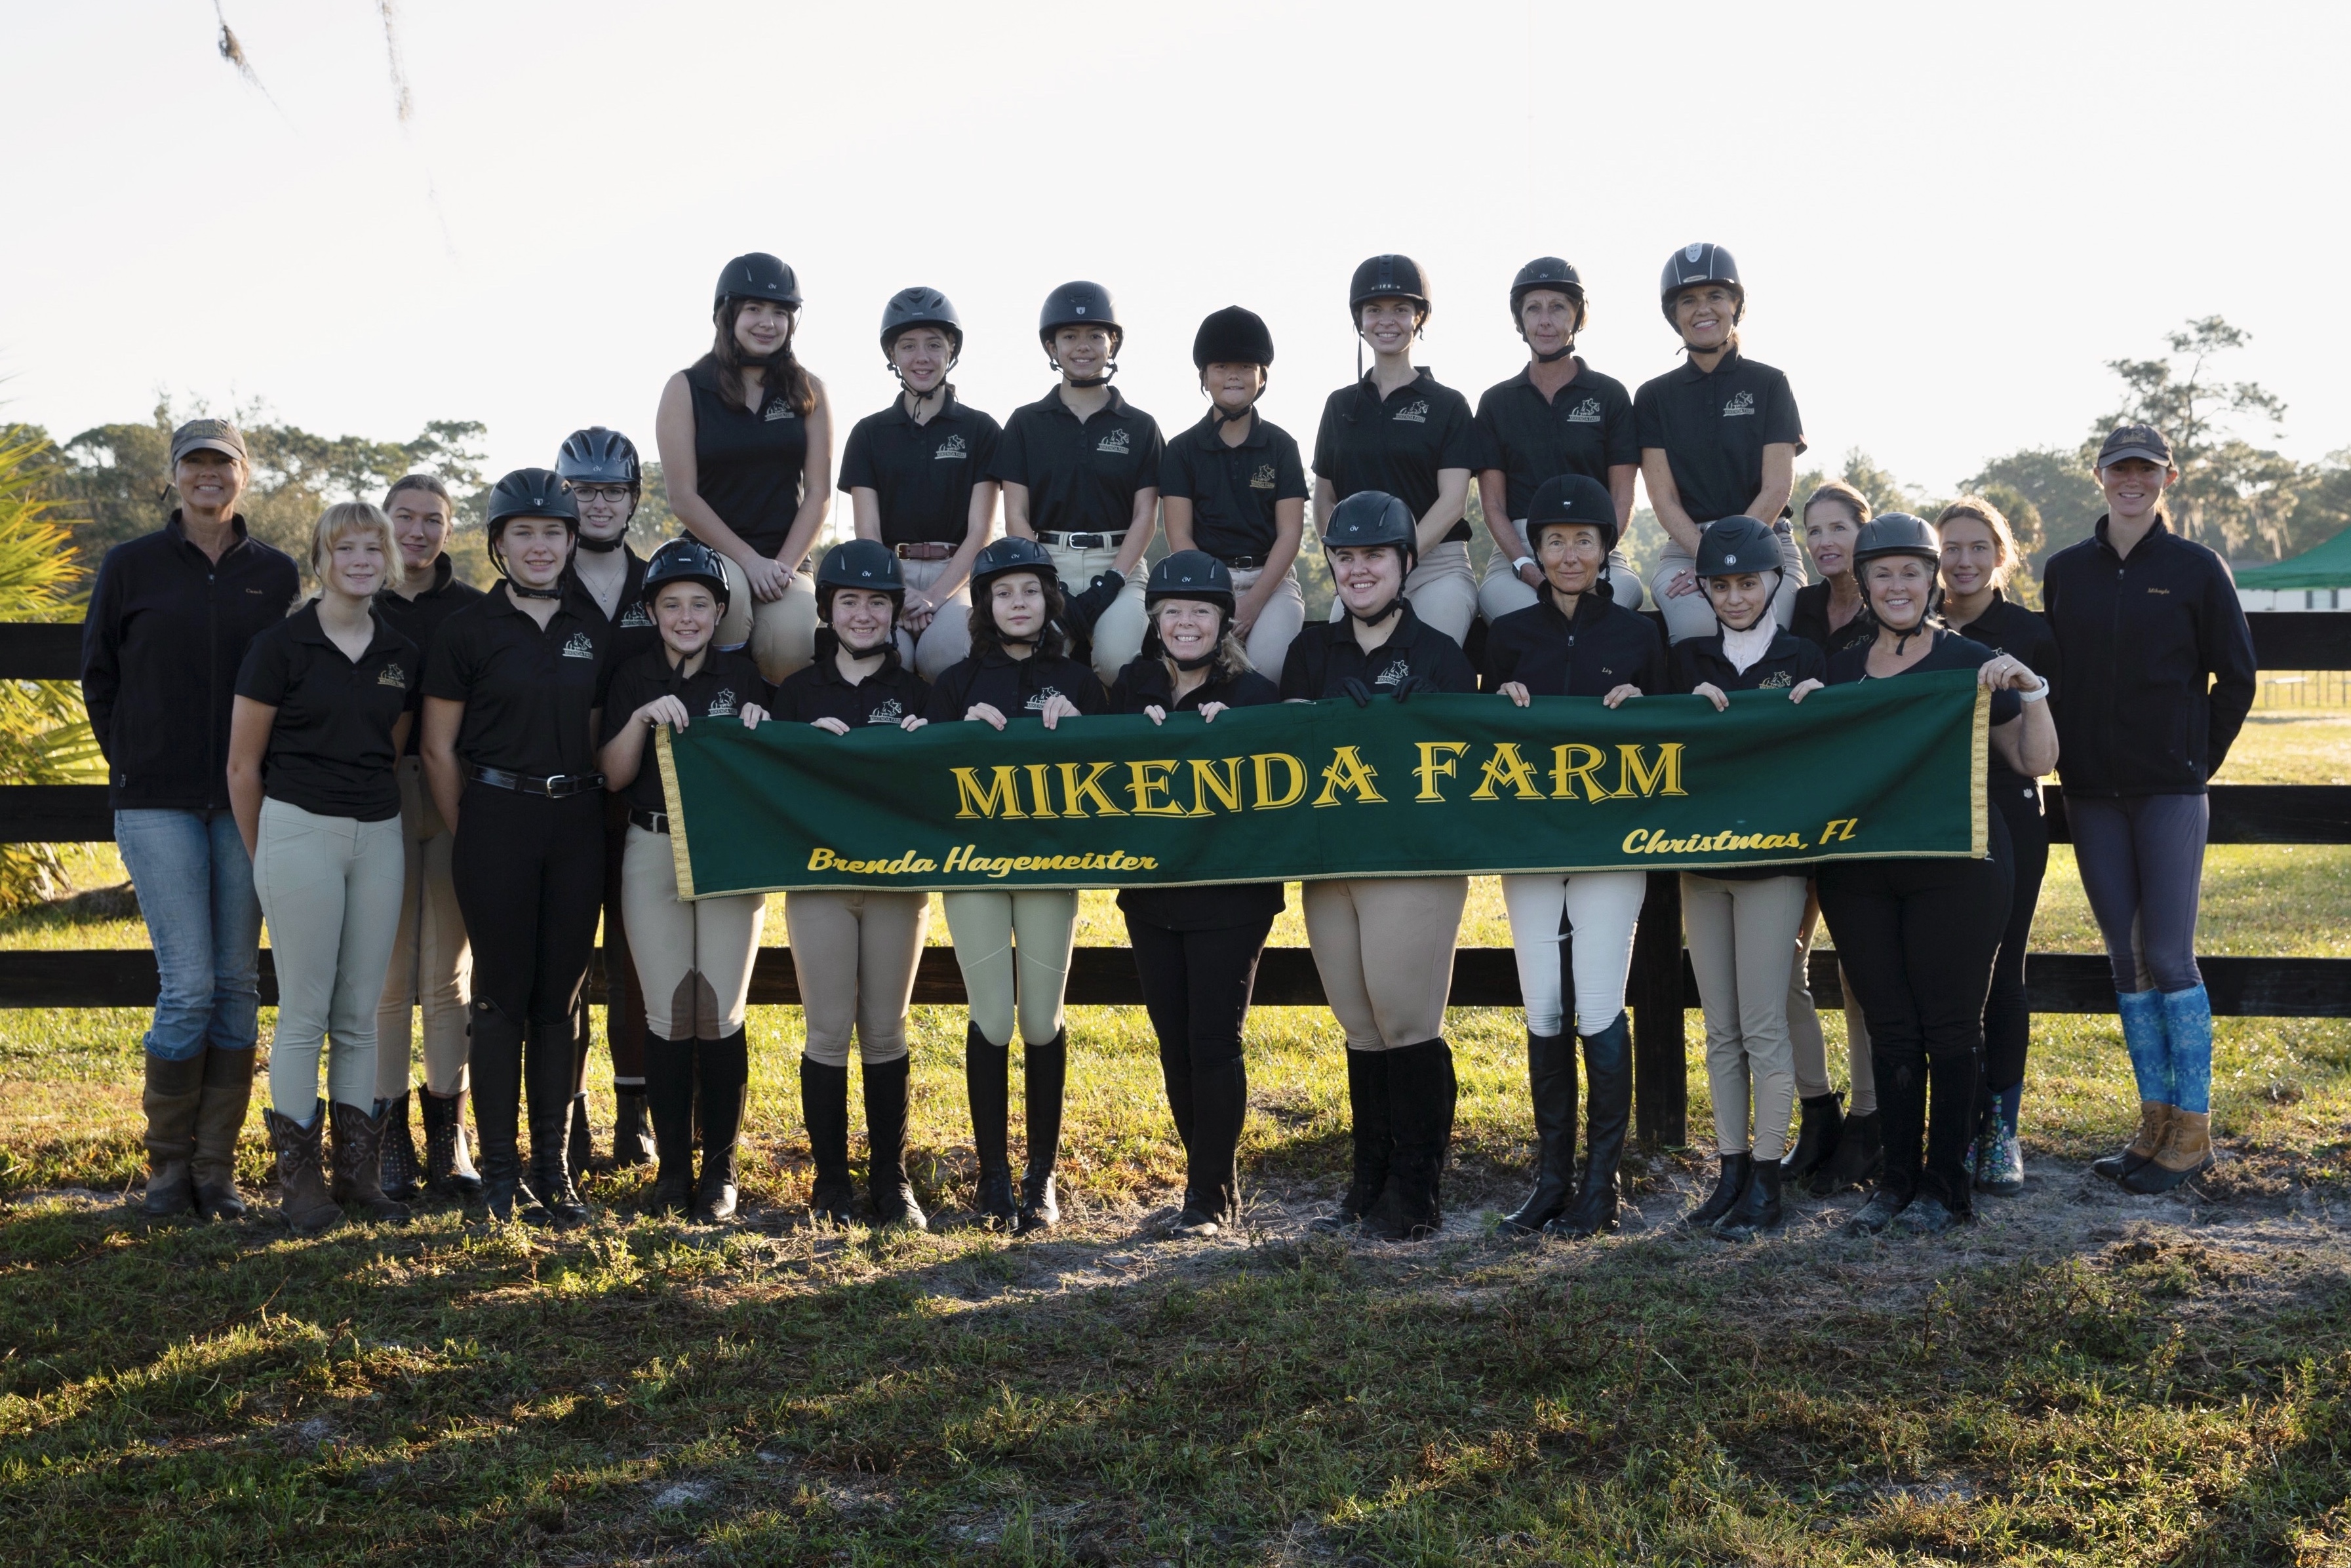 Second slide: Mikenda Farm in Christmas, FLHorse going over obstacle